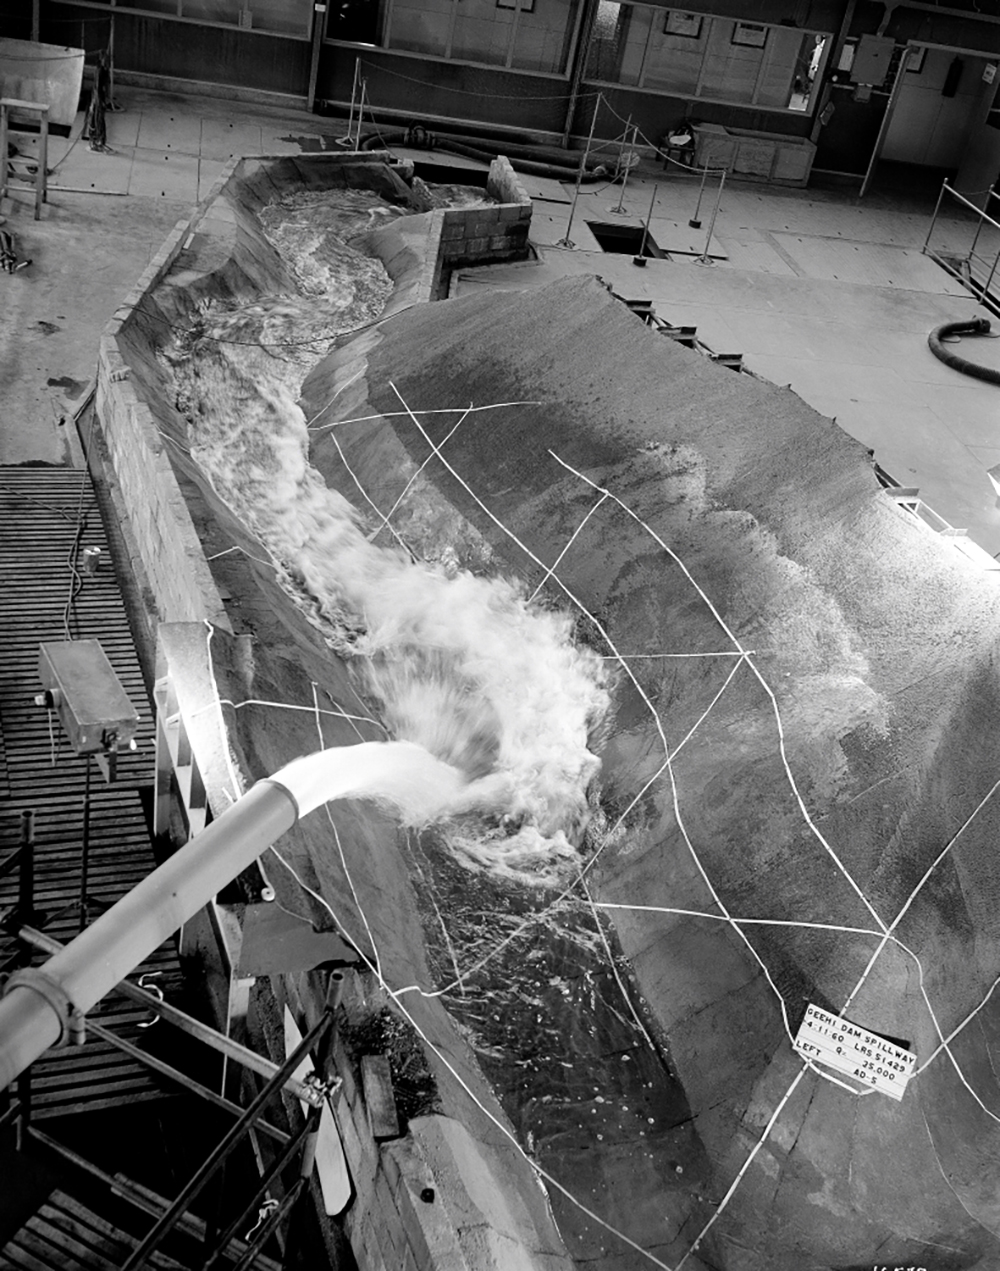 Image 3 of 5 - Black and white image of water gushing out of a pipe into a dam spillway model.